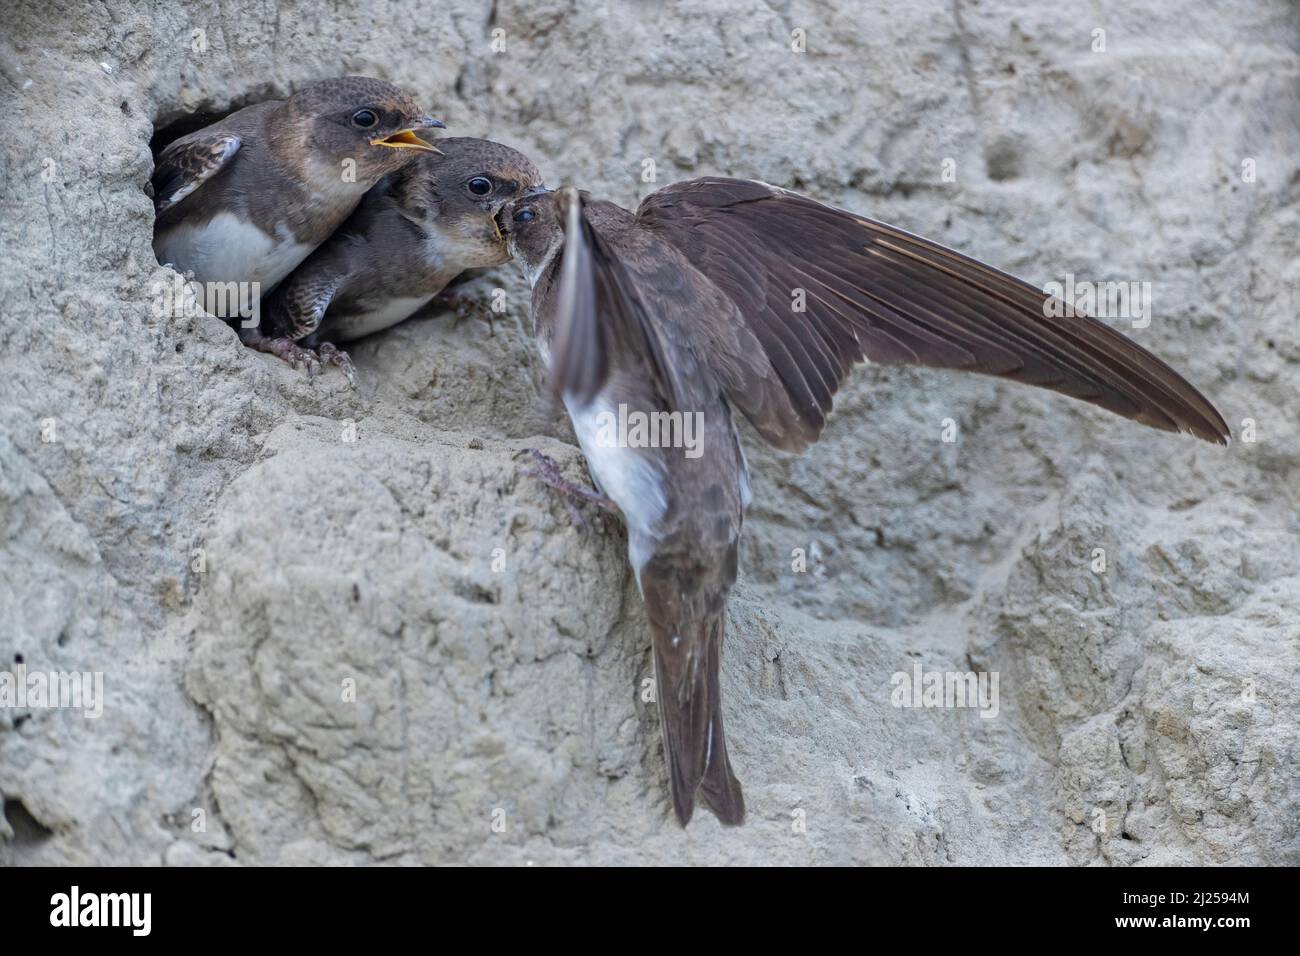 Sand Martin (Riparia riparia). Parent stuffs the food deep into the wide open throat of the young bird, the sibling goes empty-handed / Riparia riparia Stock Photo